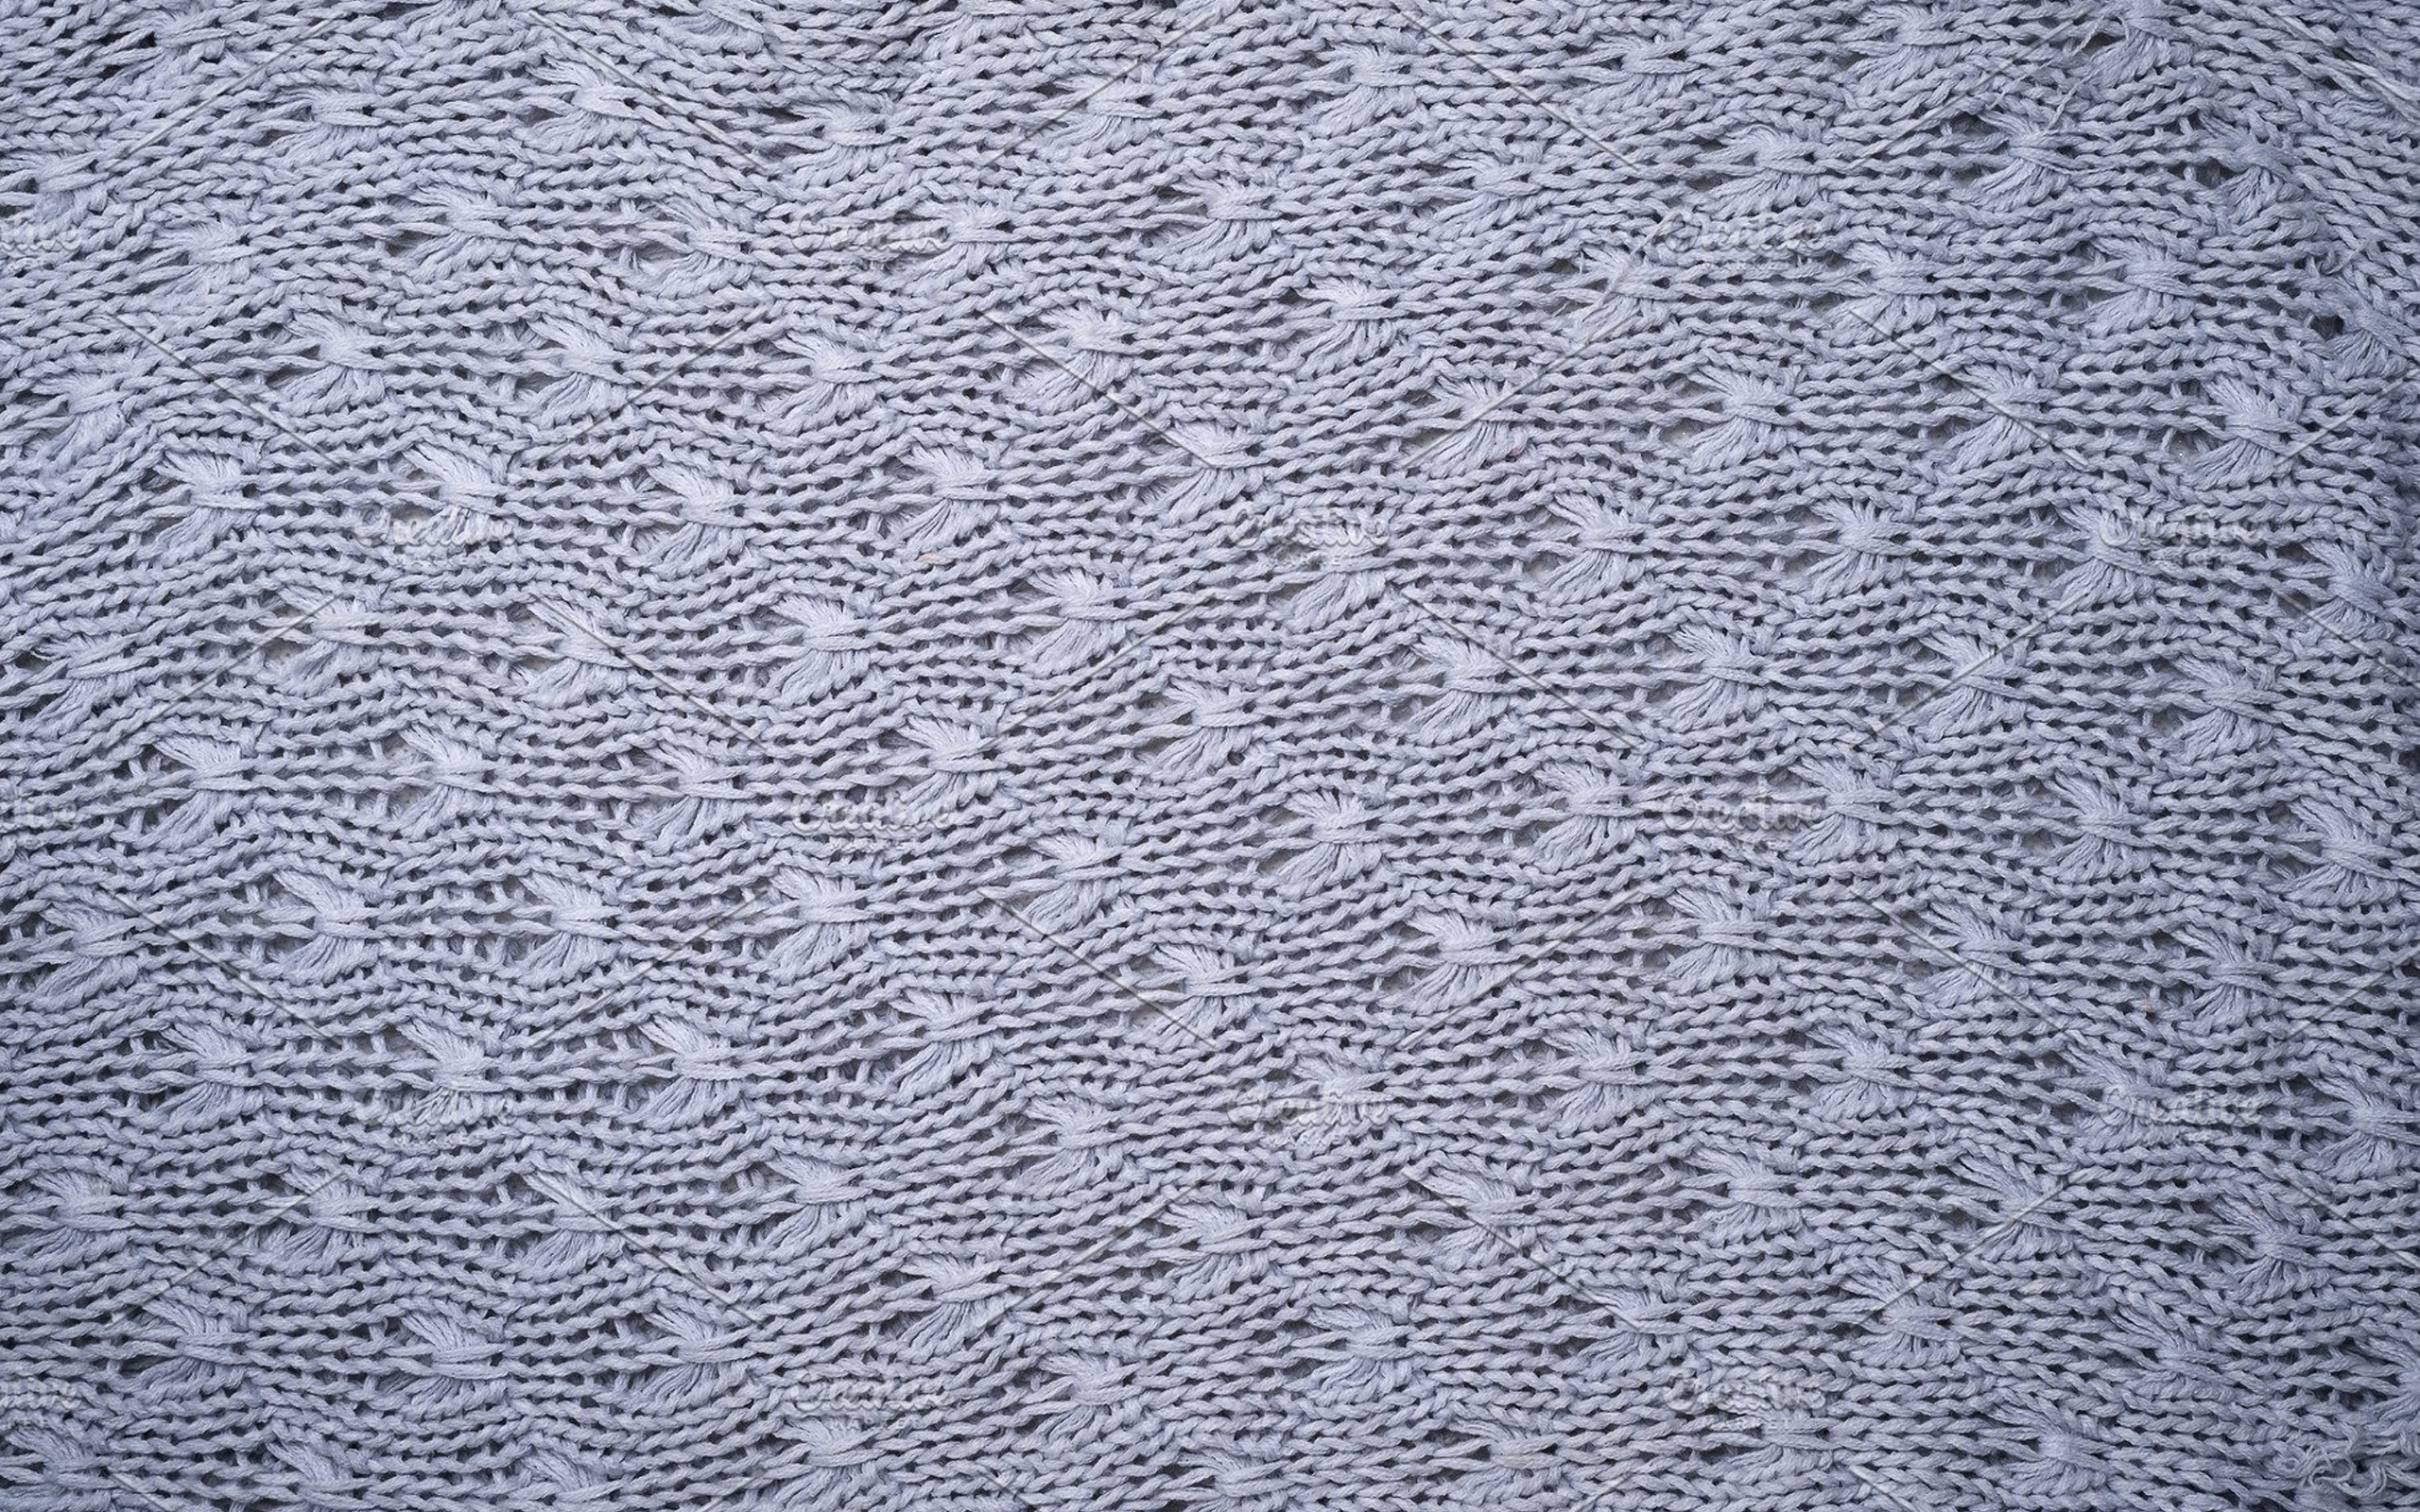 Gray Knitted Texture, Fabric Background With Patterns, - Knitting - HD Wallpaper 